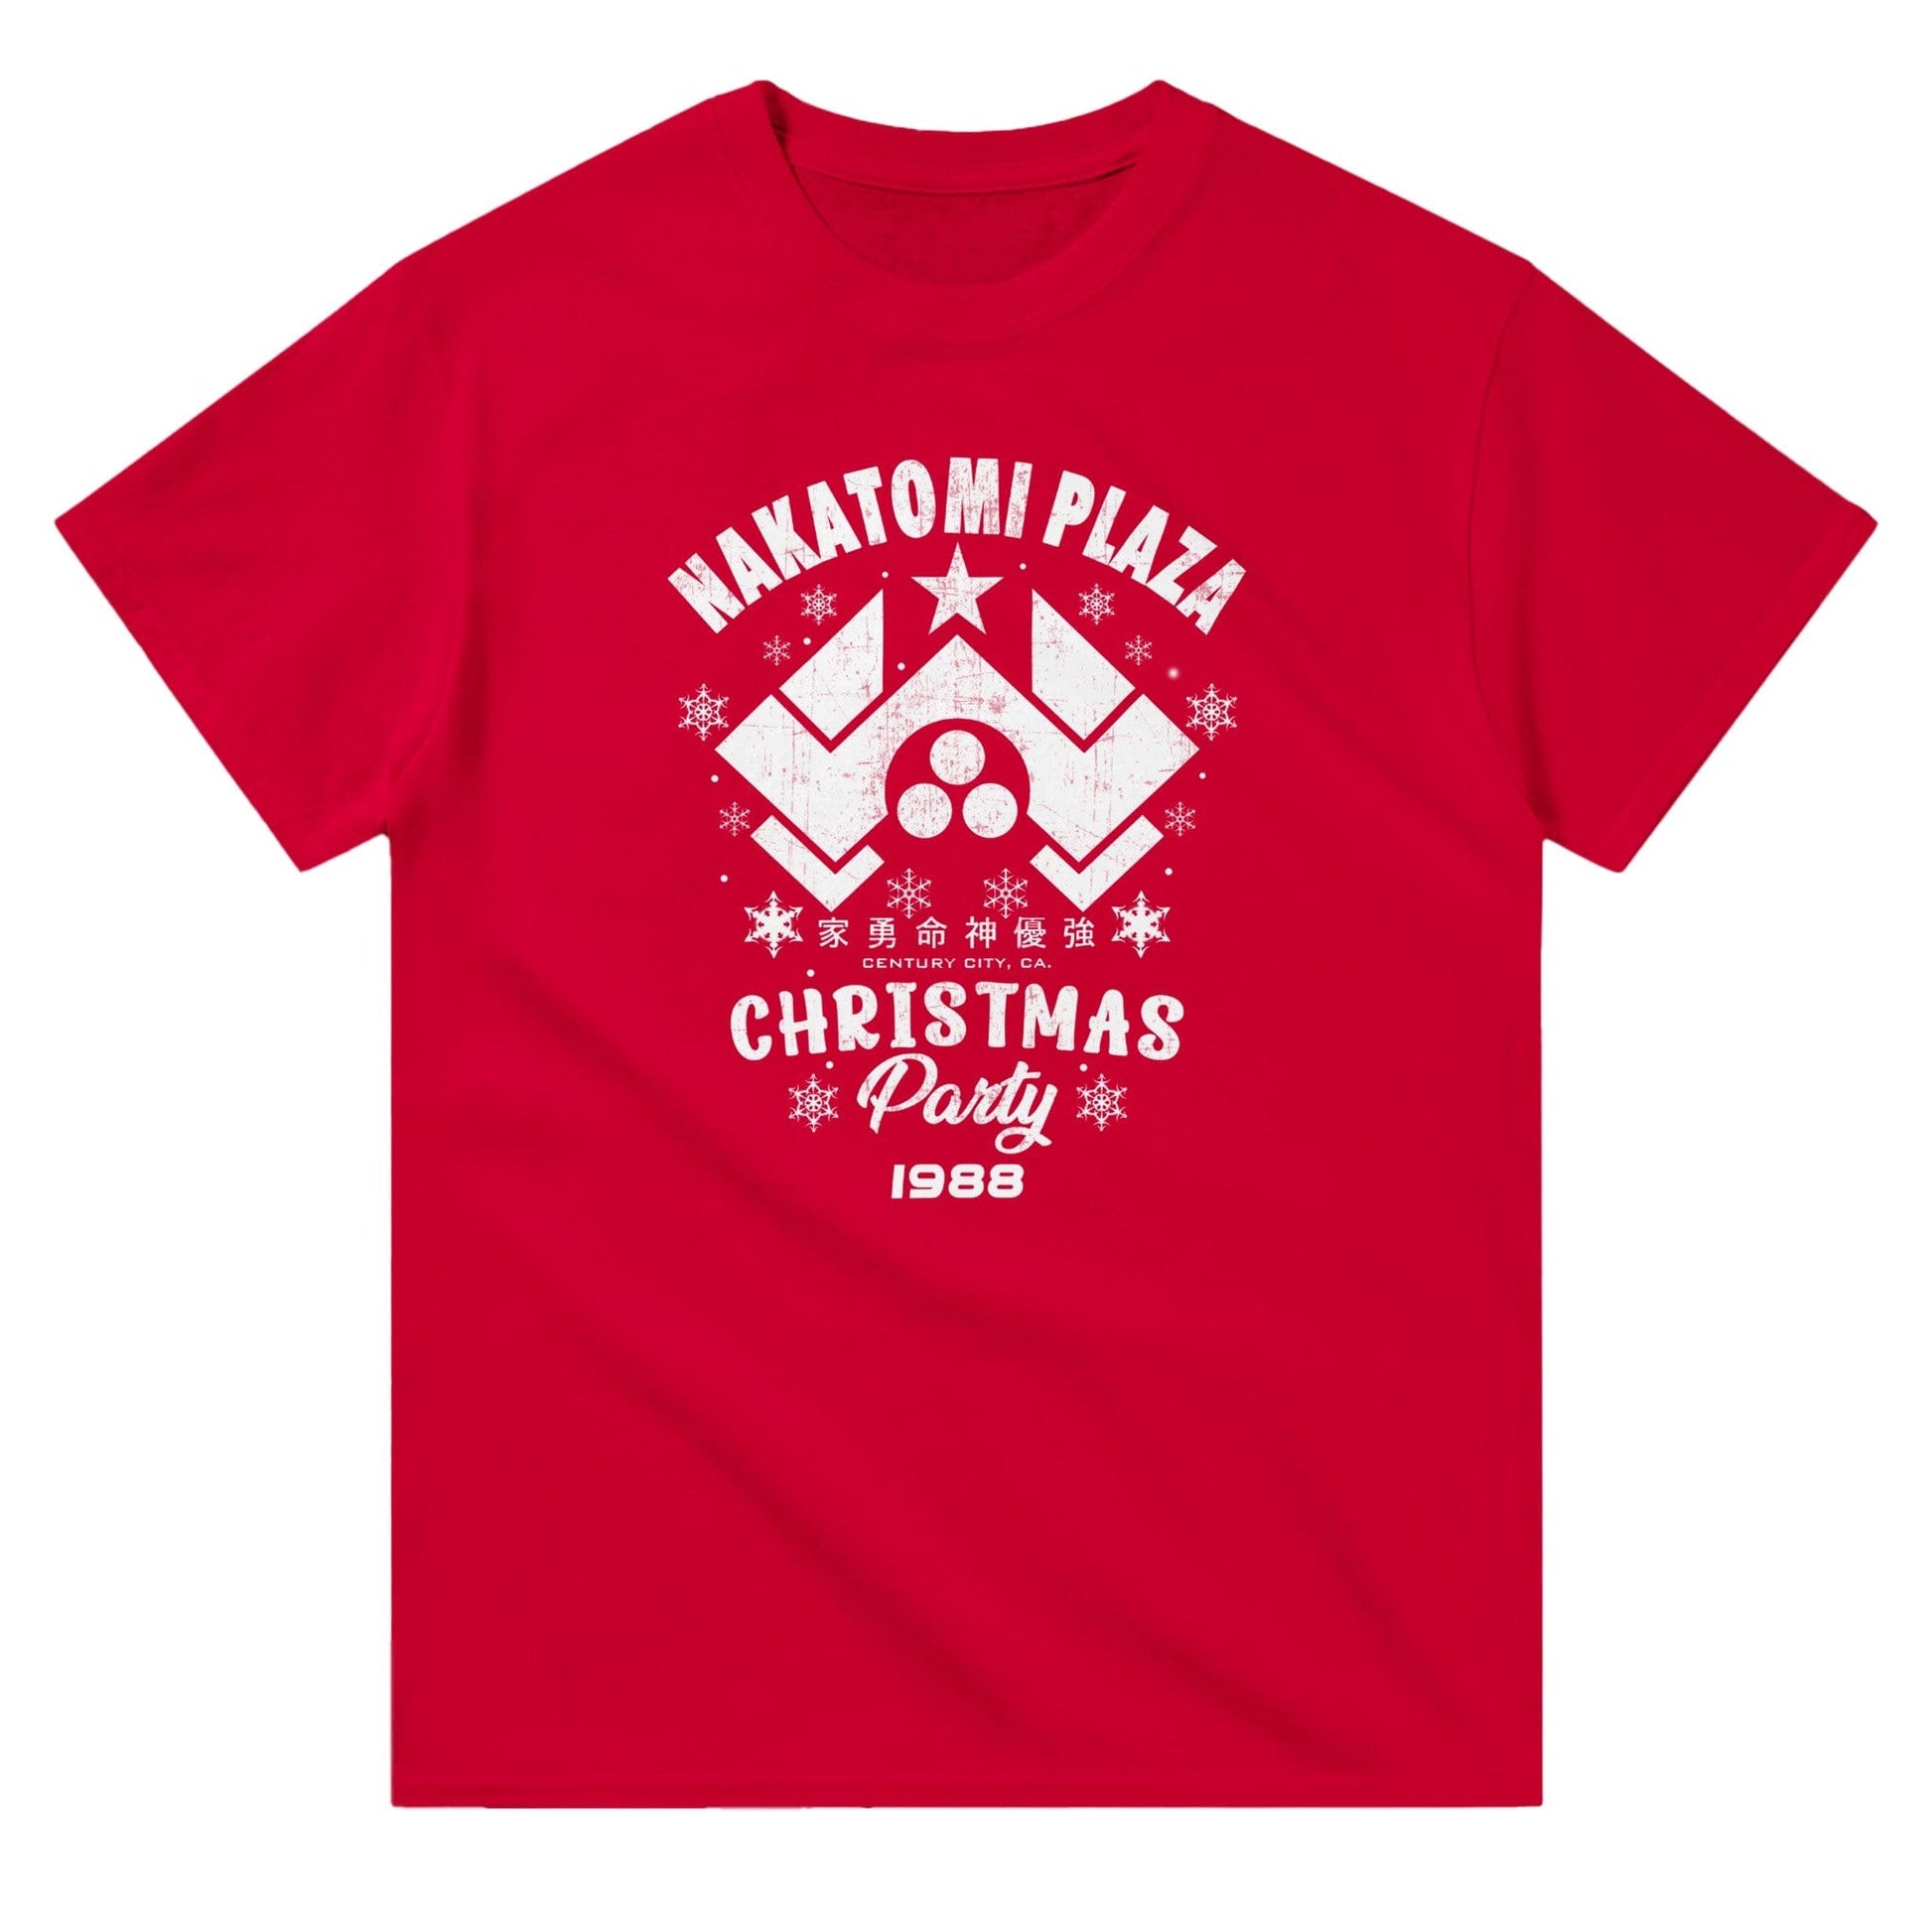 NAKATOMI PLAZA CHRISTMAS PARTY T-Shirt Australia Online Color Red / S / New Design